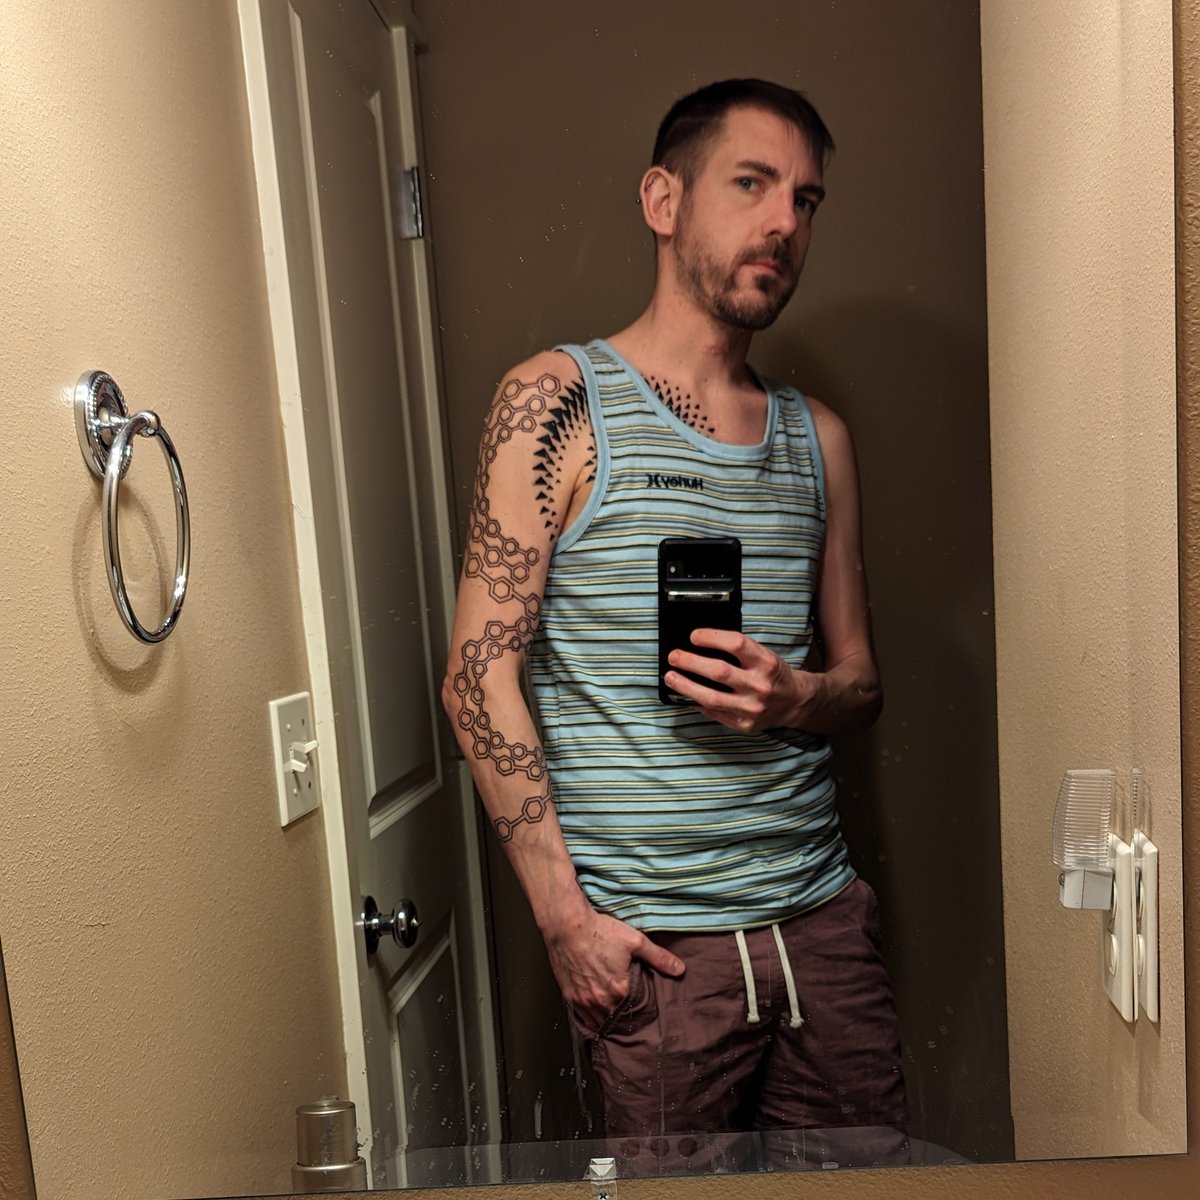 #NewProfilePic Oh yeah... By the way I got my first tattoo on 4/1/24 (chest spiral) and my second tattoo on 4/12/24 (transitioning chest into full sleeve) next apt set for 4/30/24. #GoBigOrGoHome 😂